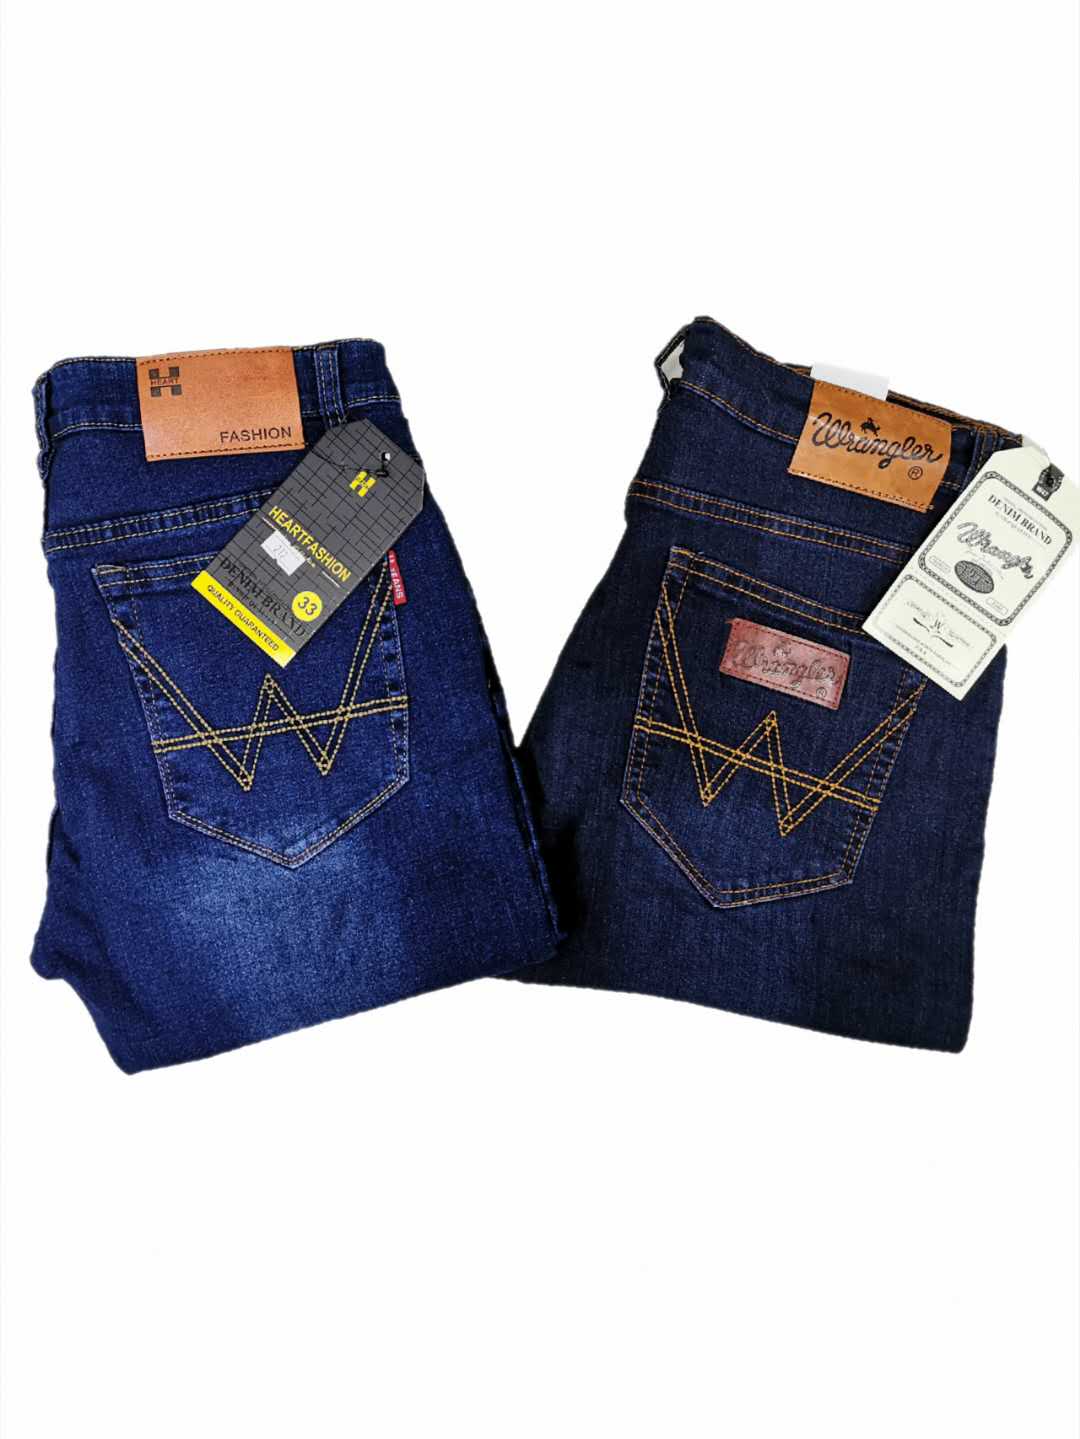 branded jeans for mens offers